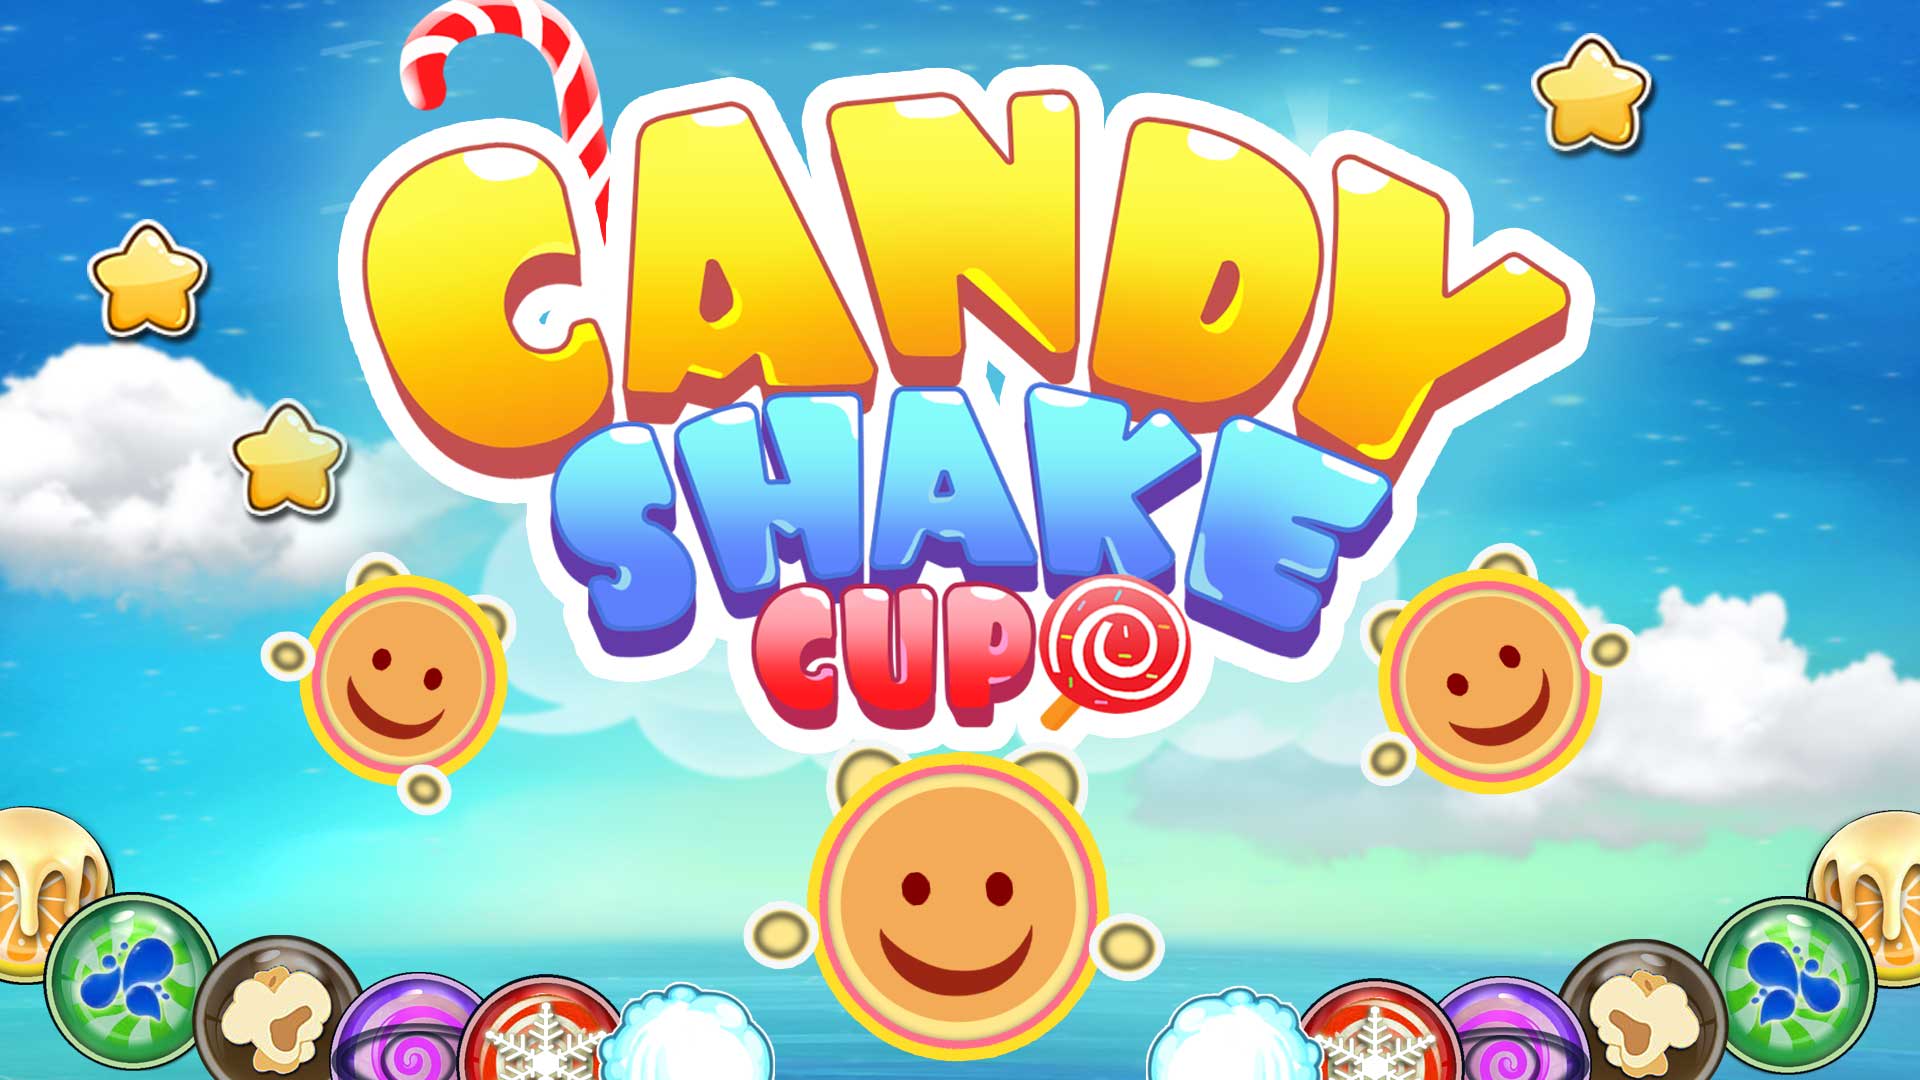 Candy Shake Cup 1